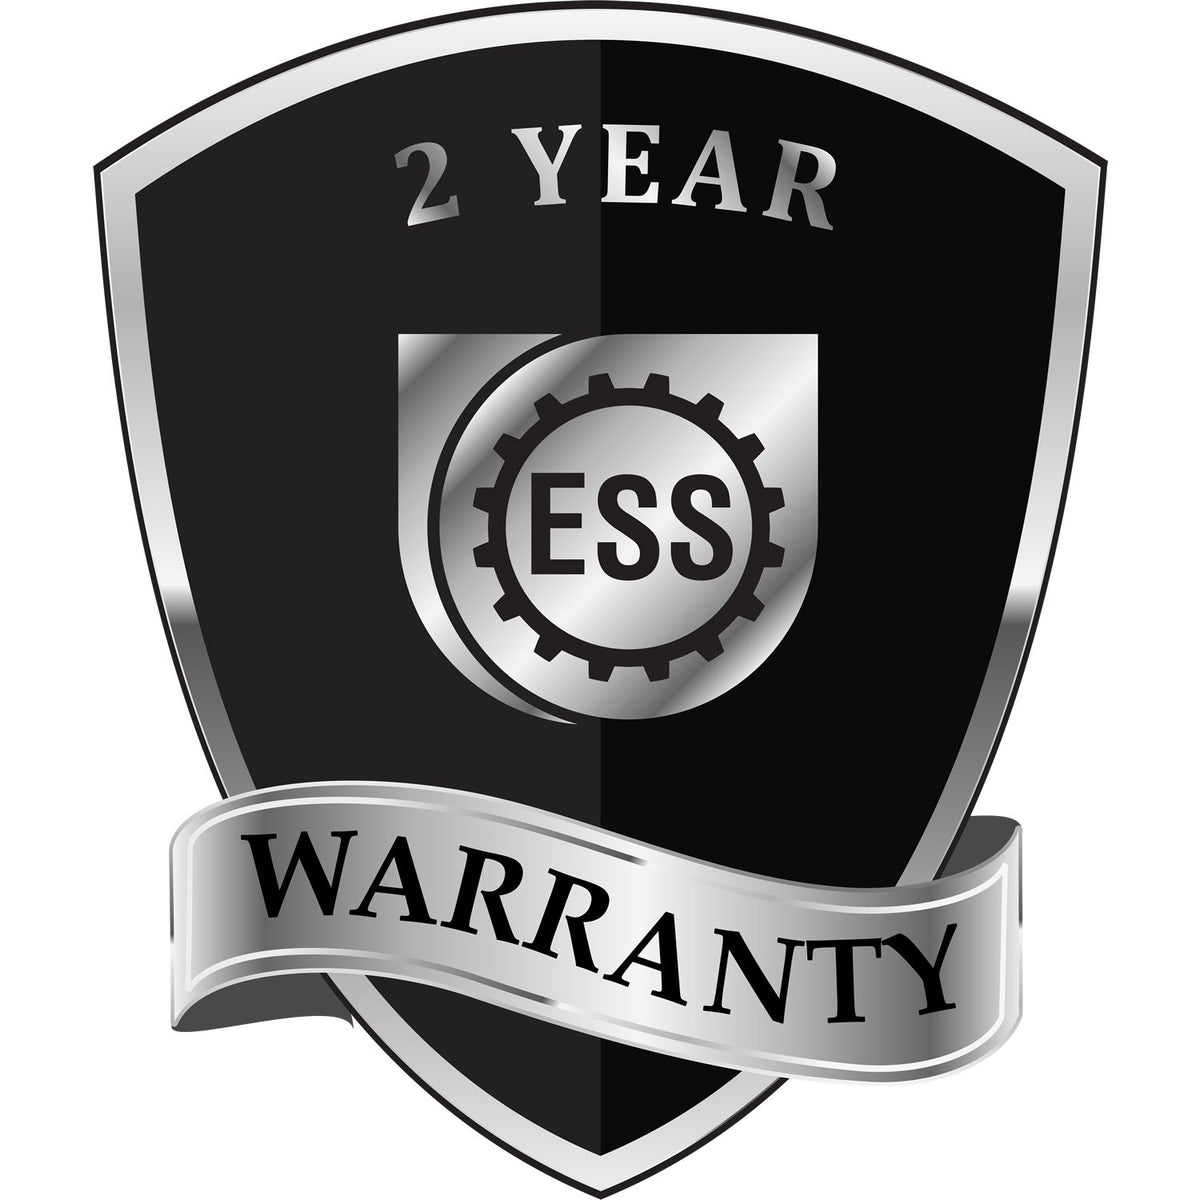 A badge or emblem showing a warranty icon for the Long Reach Pennsylvania PE Seal